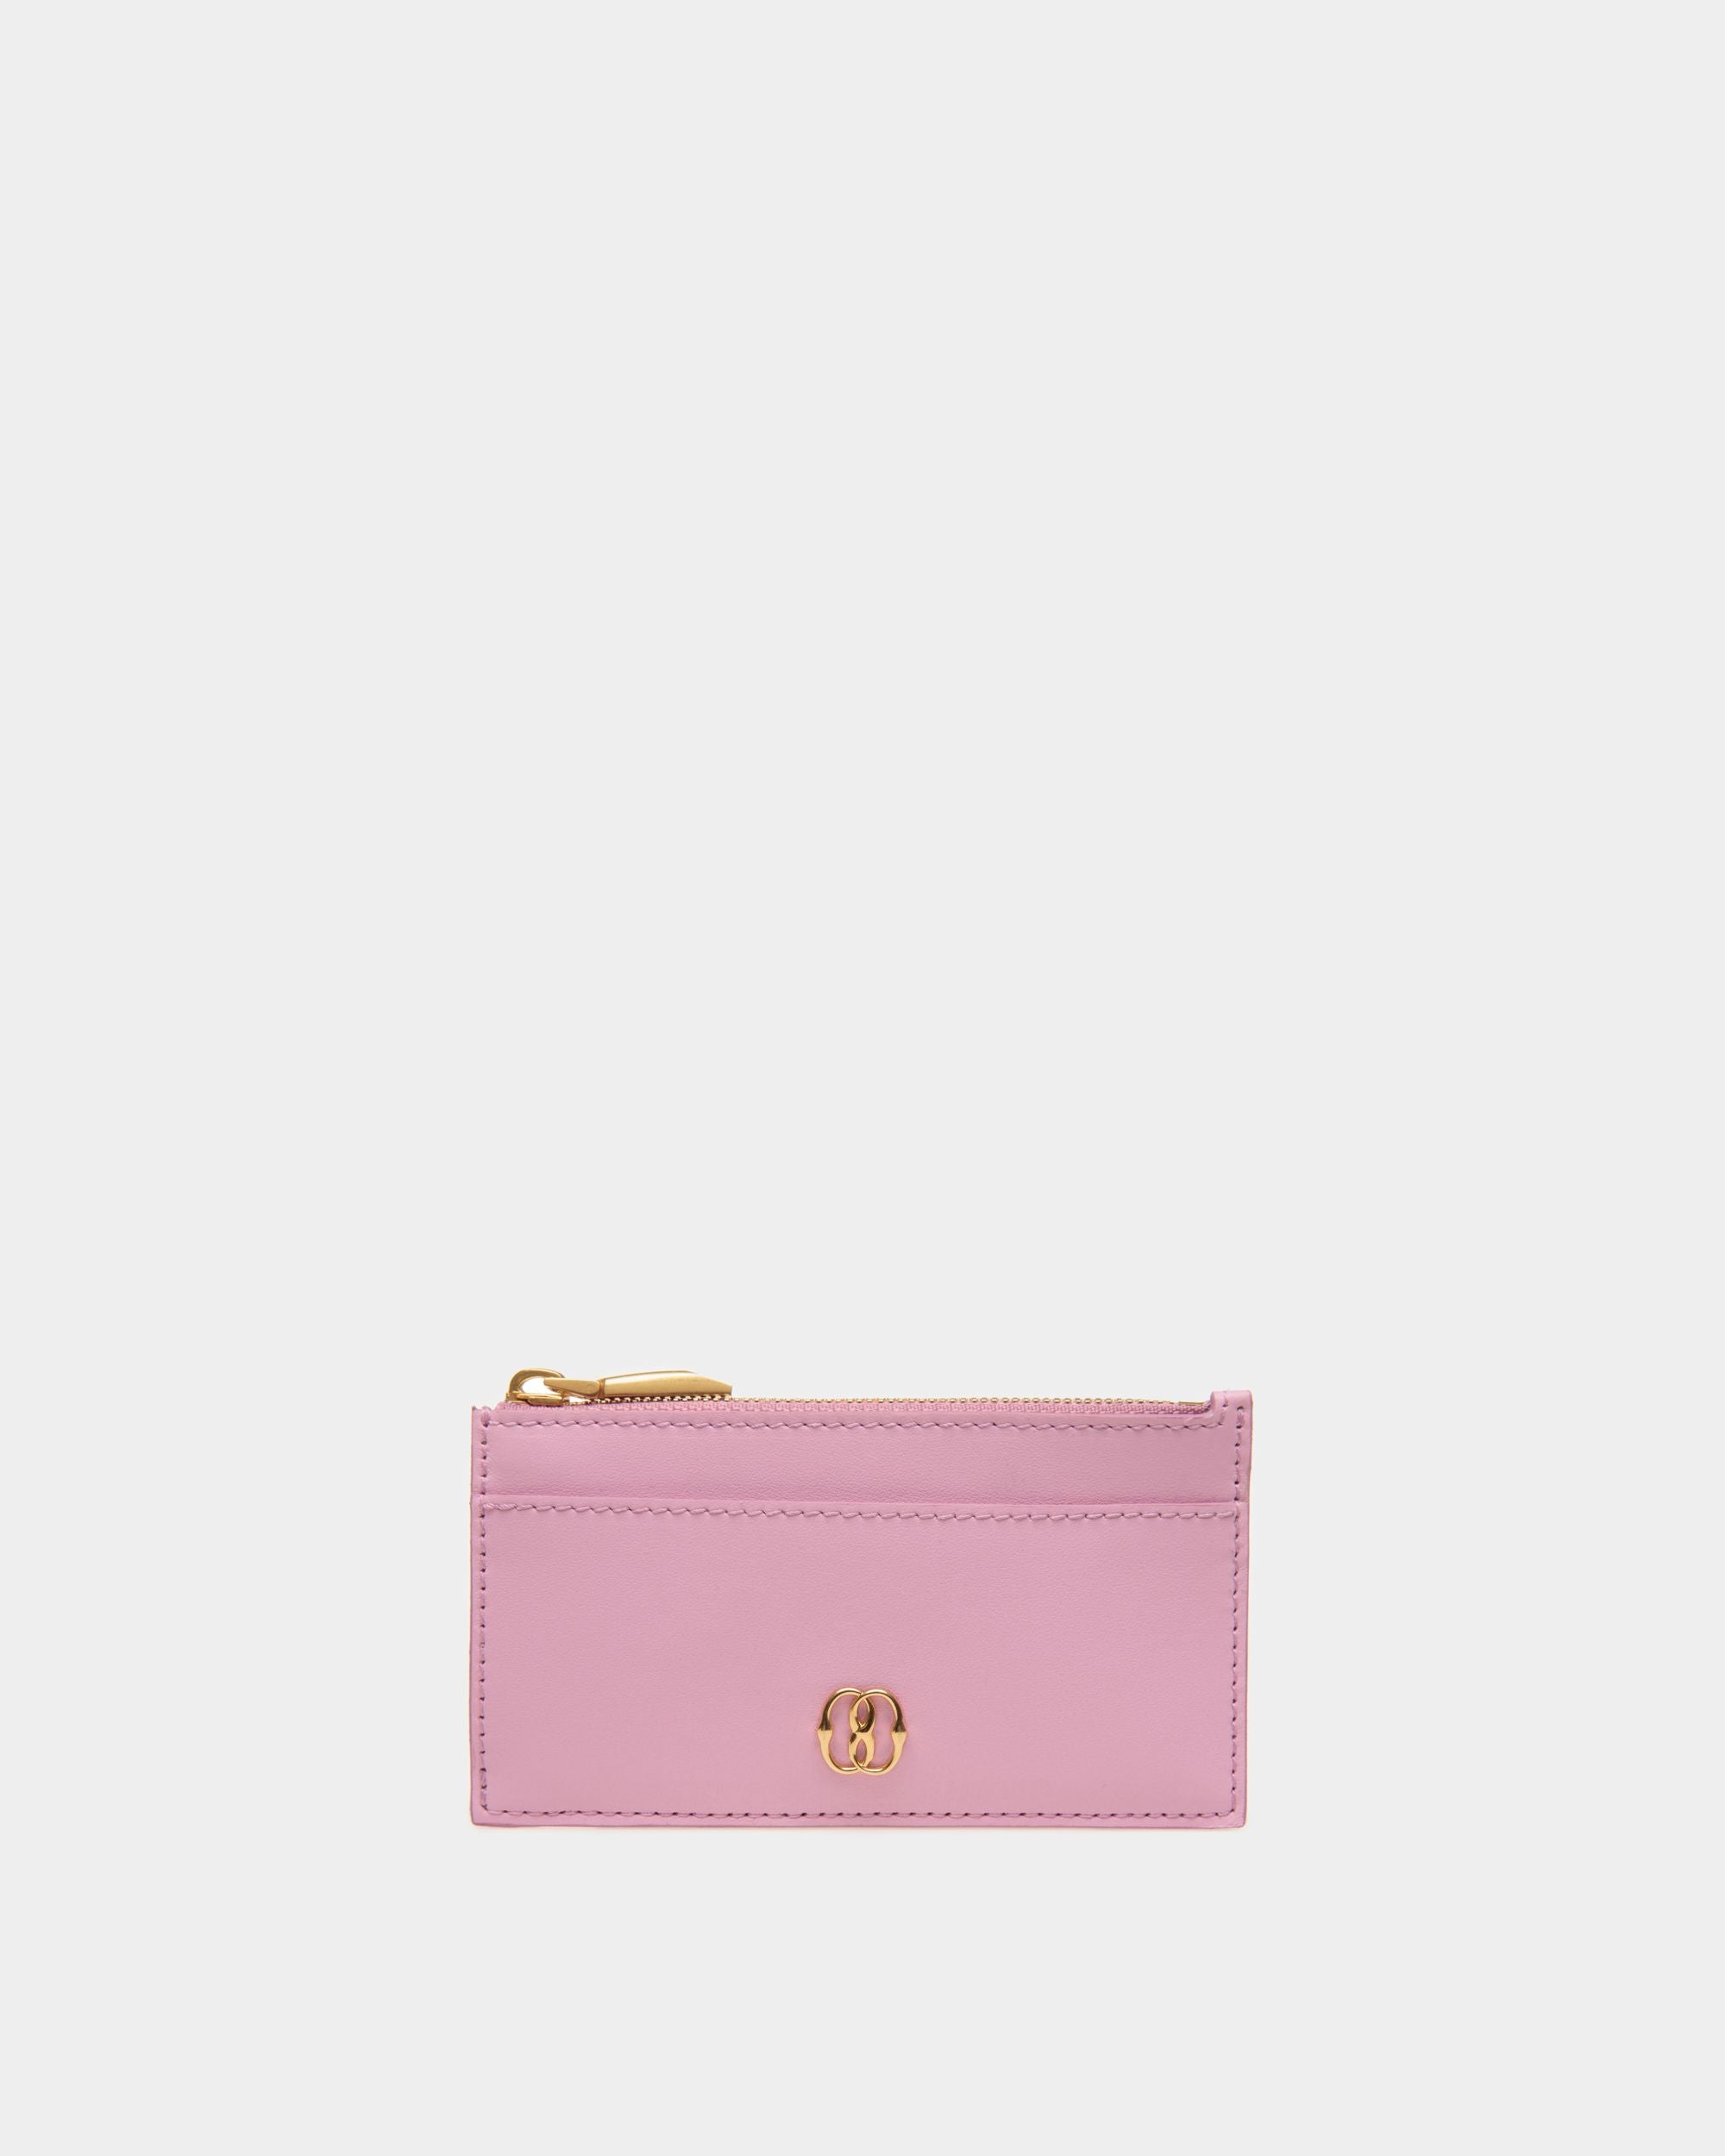 Emblem | Women's Zipped Card Holder in Pink Leather | Bally | Still Life Front